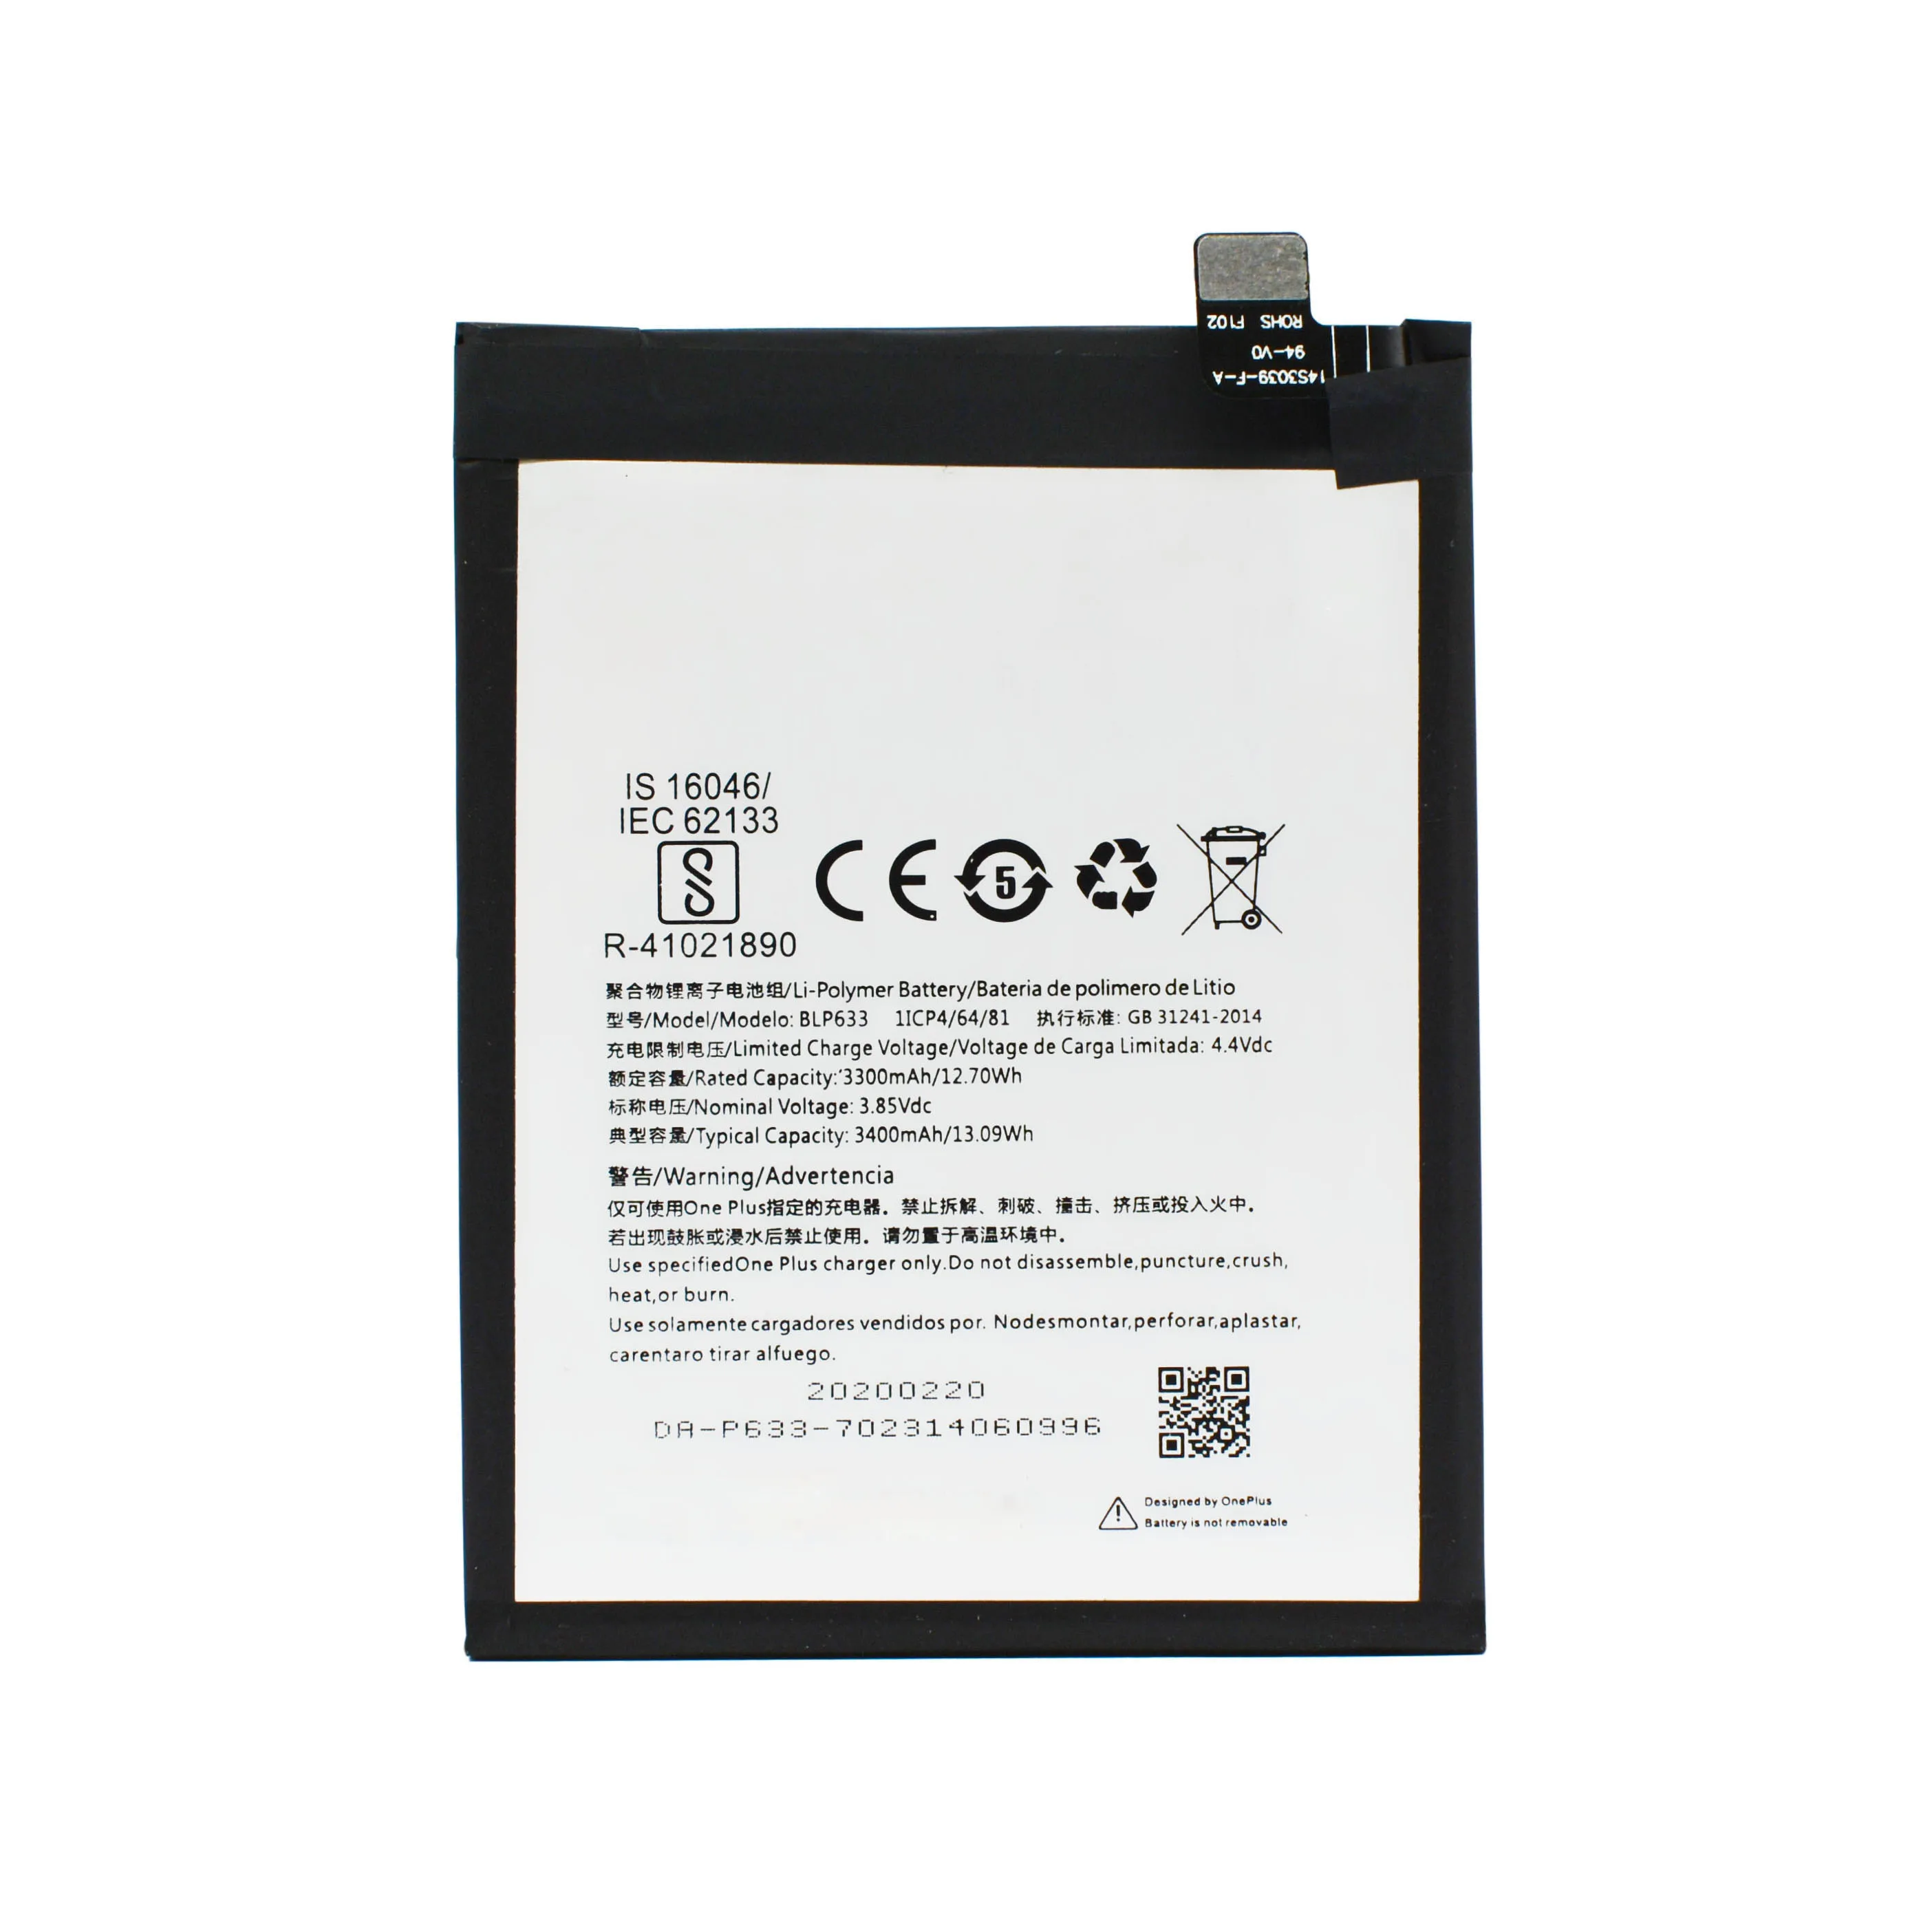 

Smartphone Li-ion replacement 3400mAh Battery BLP633 For One Plus 3T Three T A3010 AKKu DDP service high quality hot sale, As the picture show